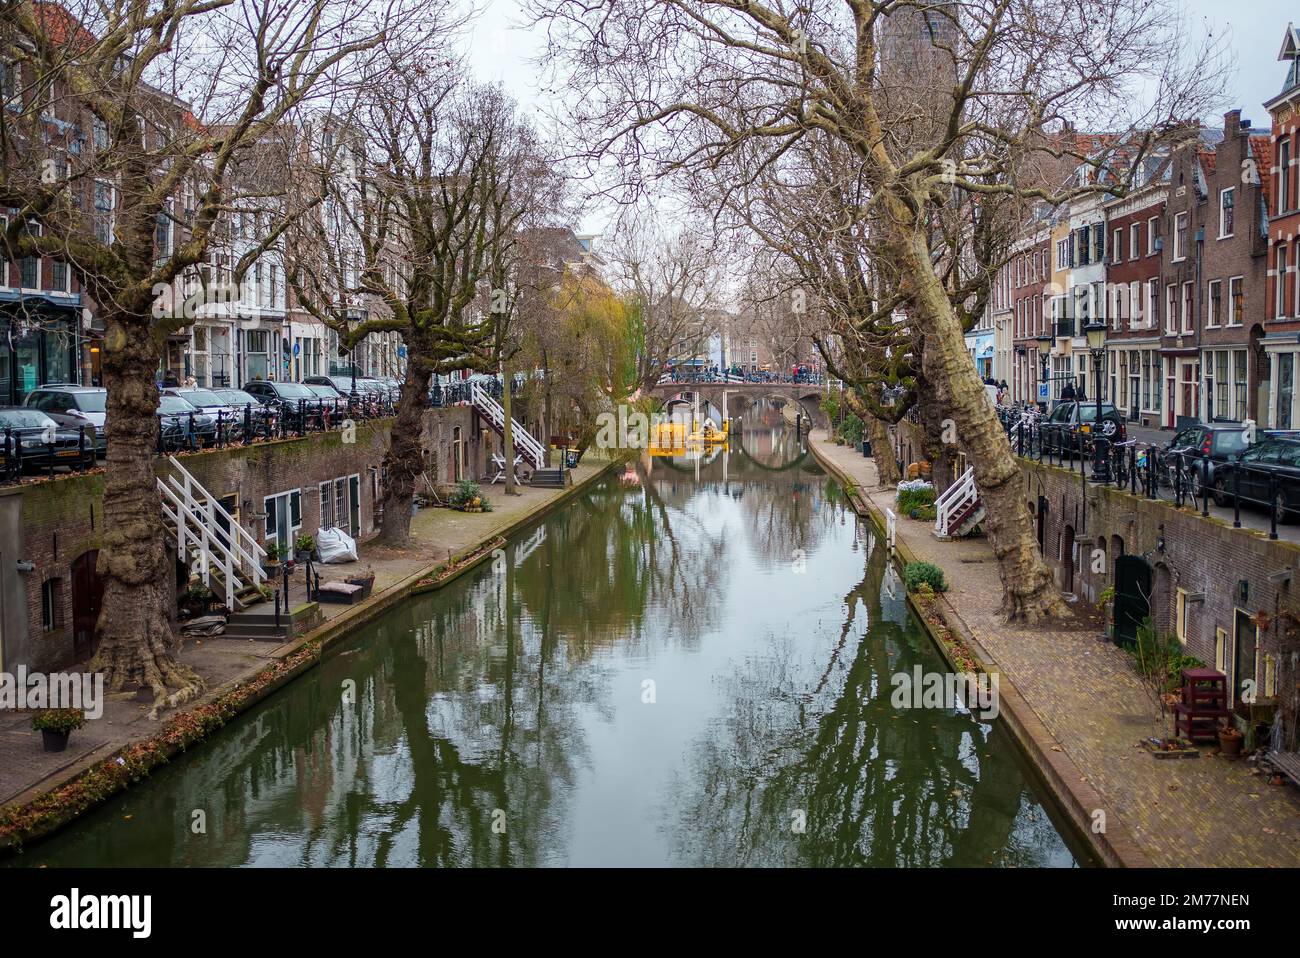 Ancient city center of Utrecht, Netherland - canal view with cafes, restaurants and shops in winter or autumn time Stock Photo